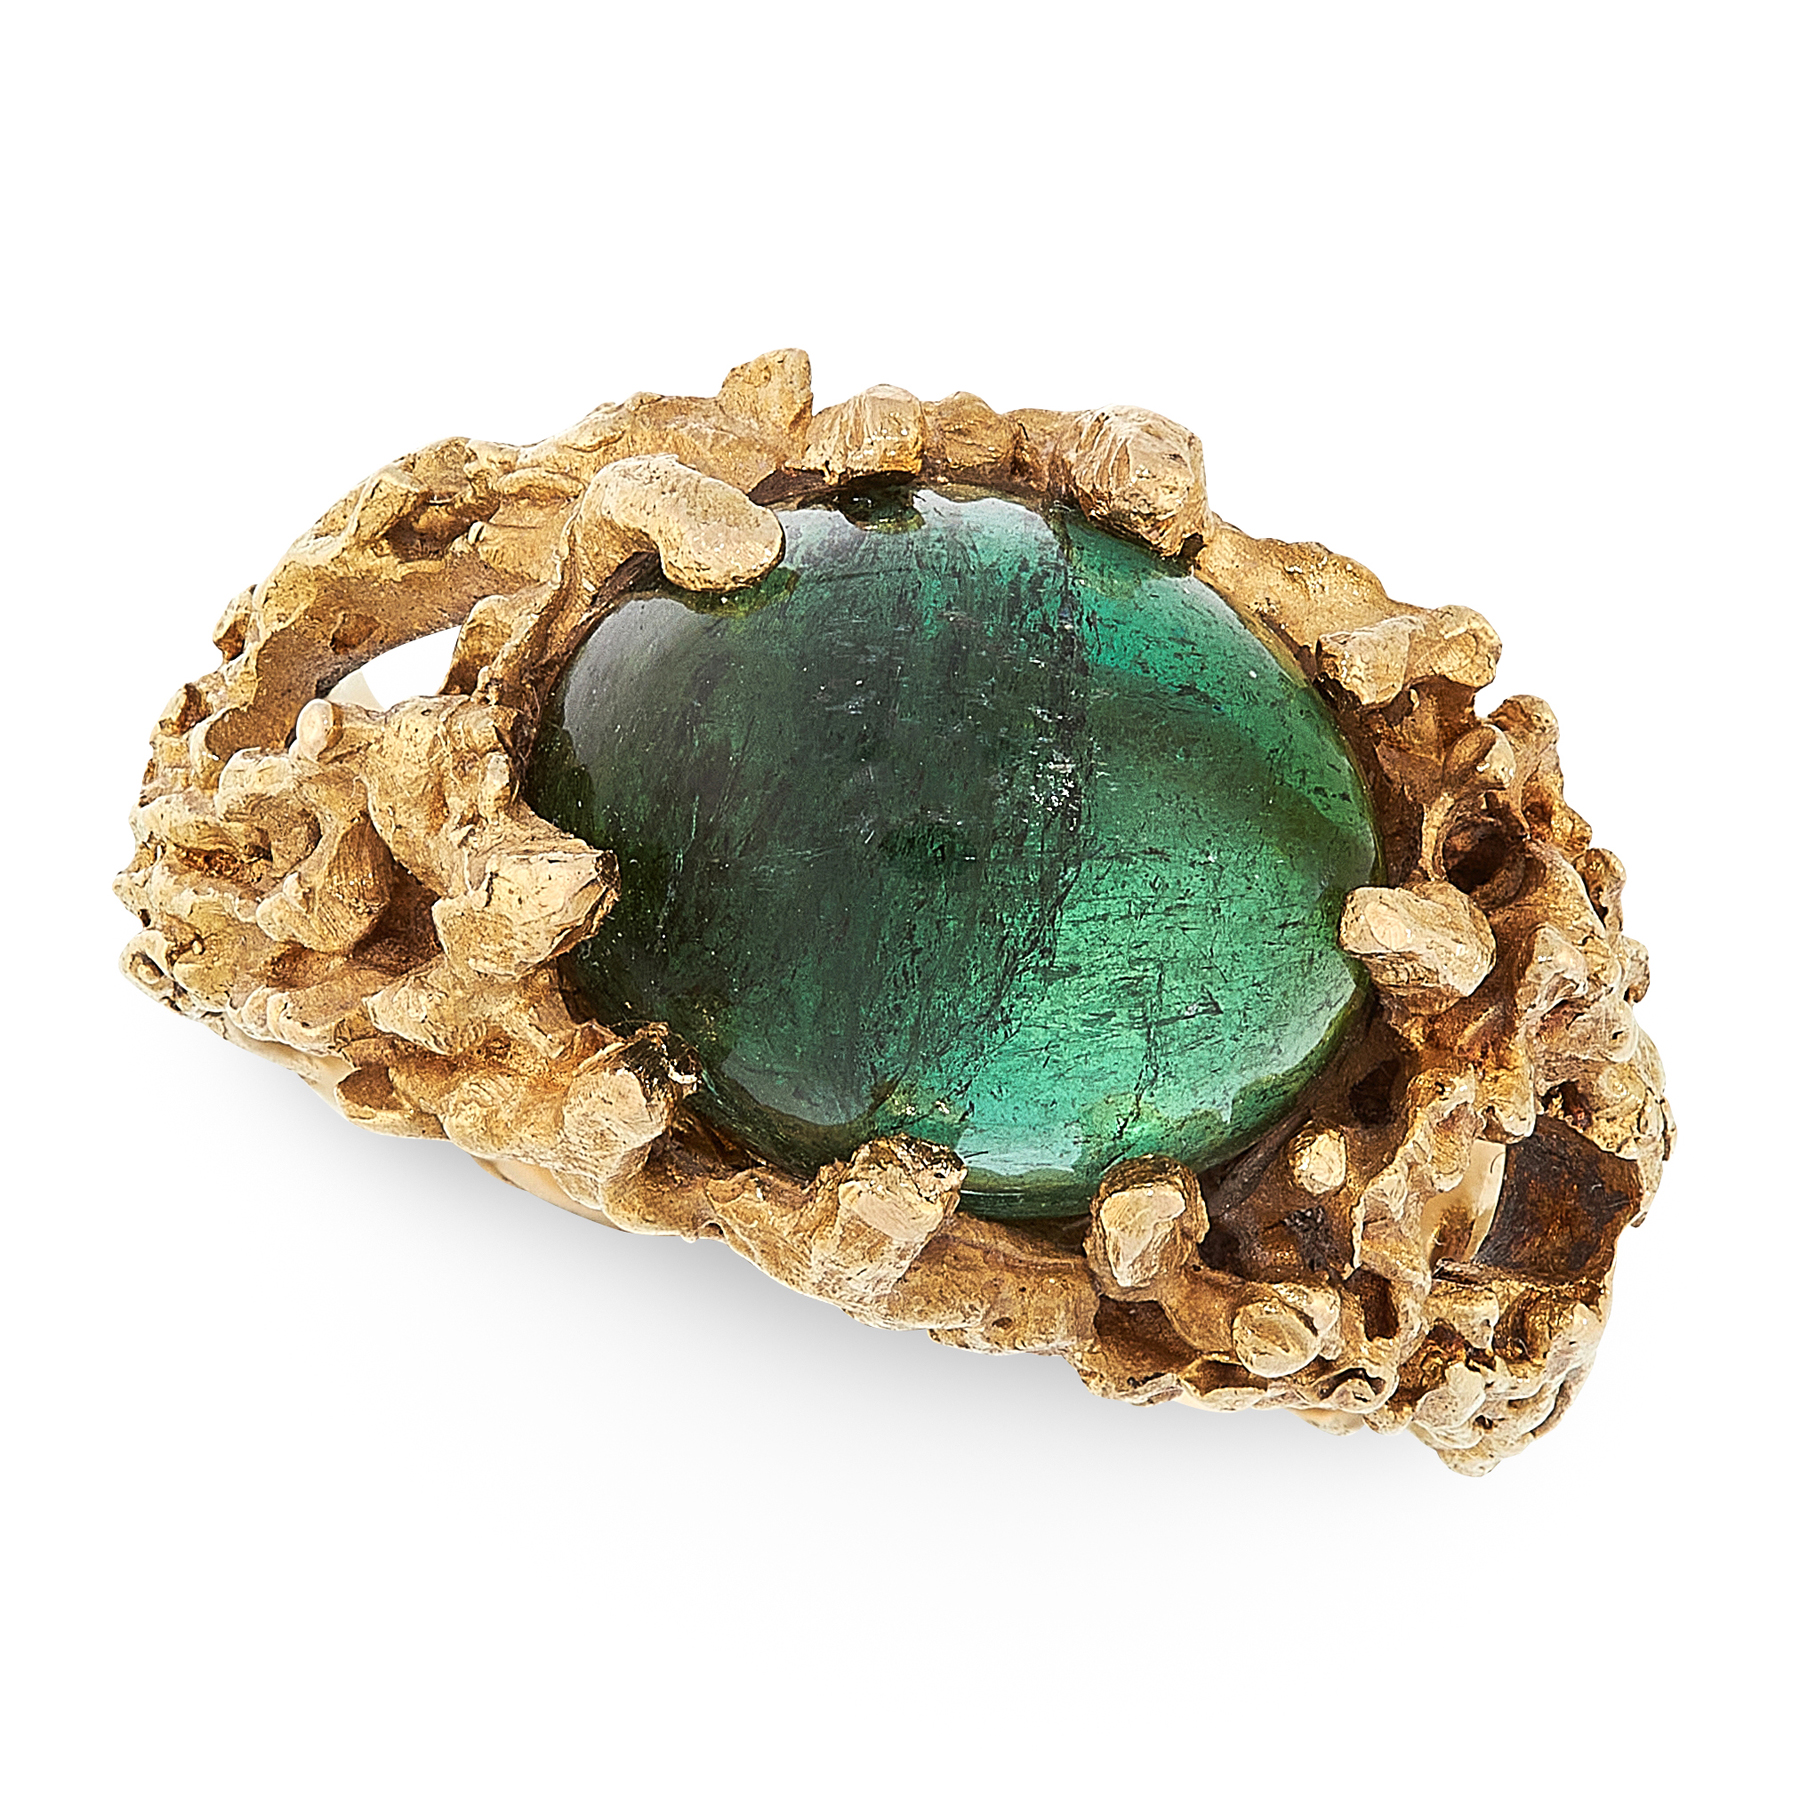 A VINTAGE TOURMALINE DRESS RING, H STERN in 18ct yellow gold, set with an oval cabochon green